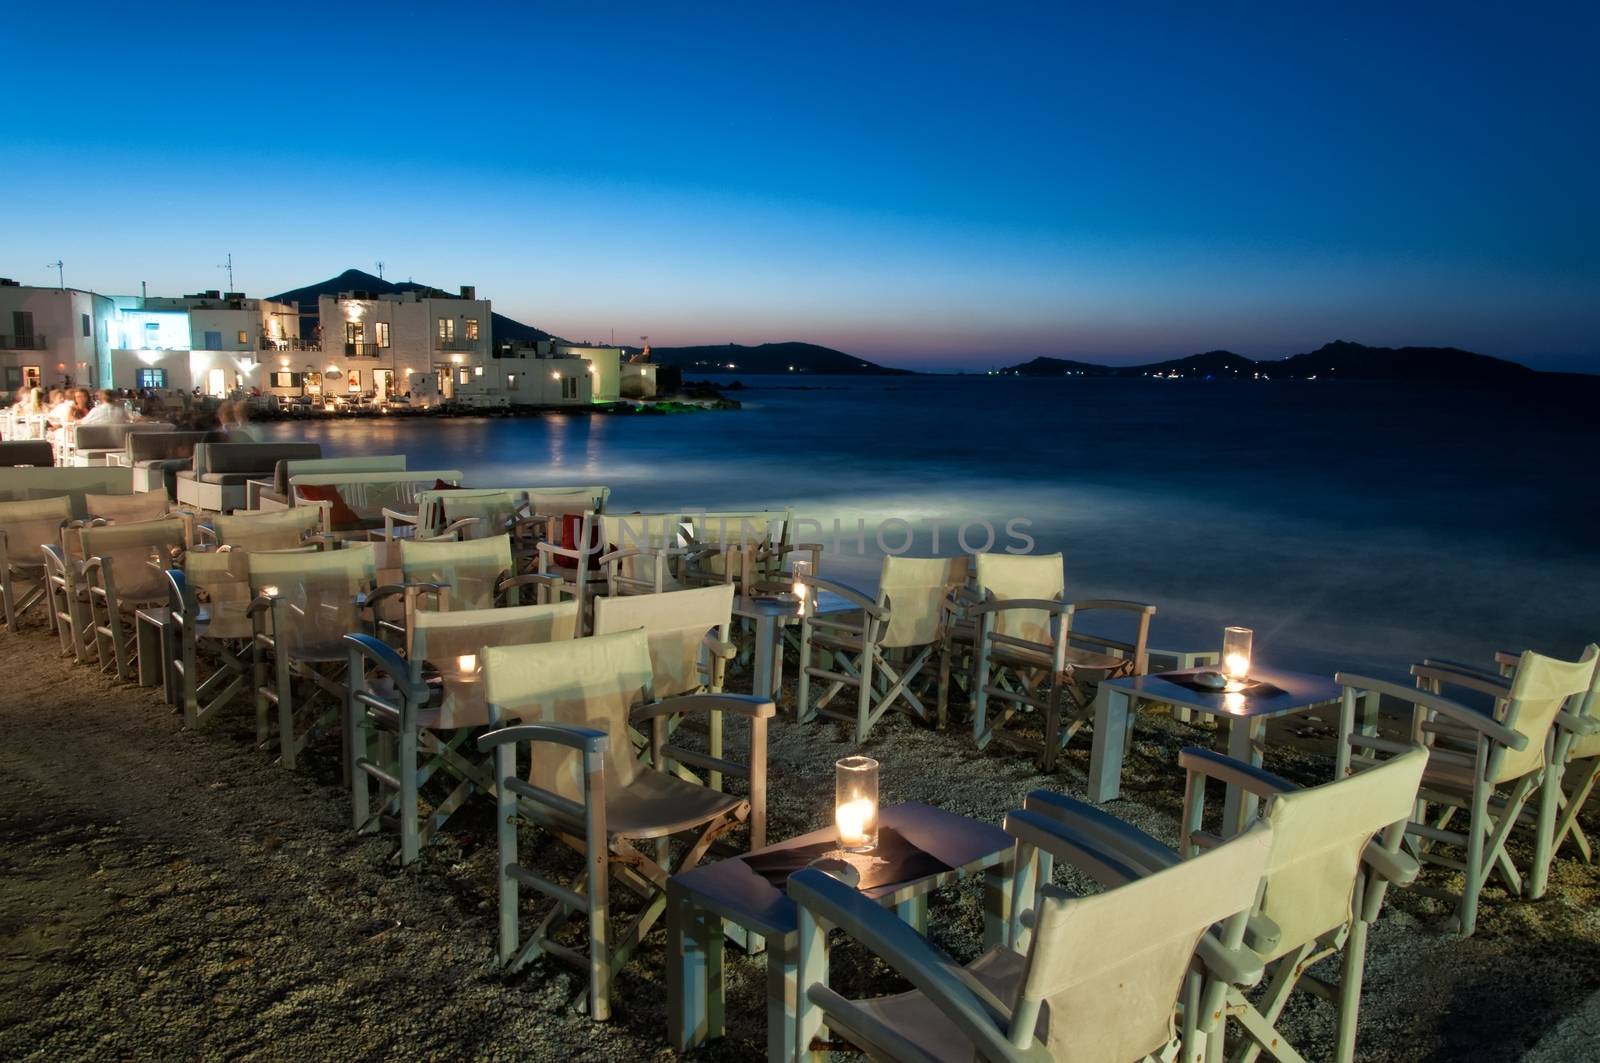 The beautiful picturesque fishing village of Naoussa is located in a huge bay in Paros island.